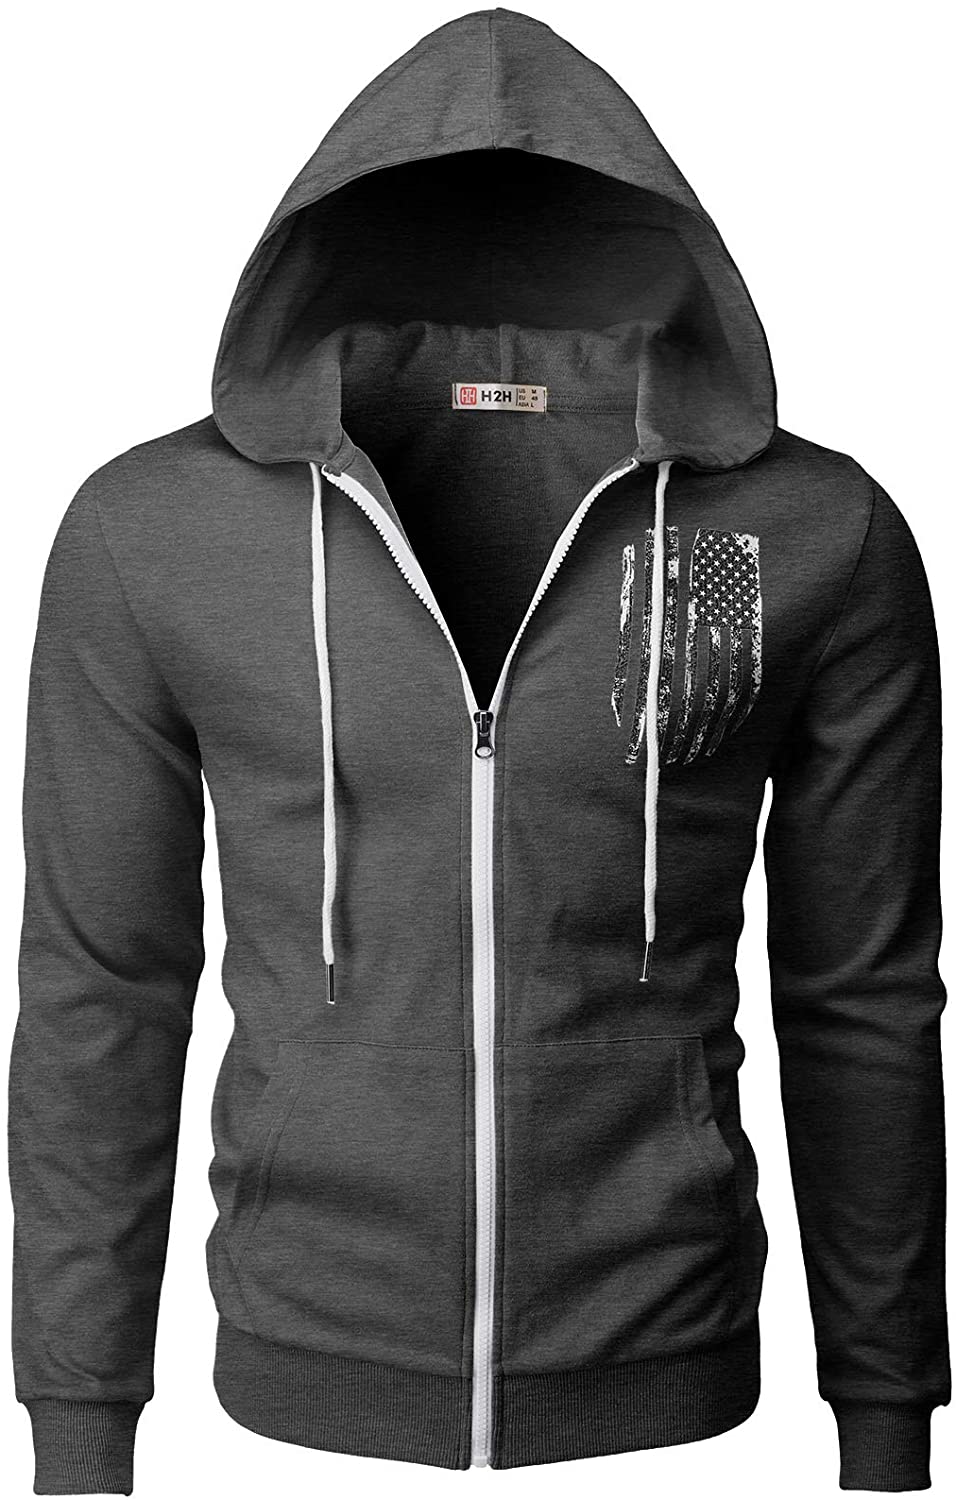 H2H Mens Casual Zip up Hoodie Jacket Double Cotton Lightweight 